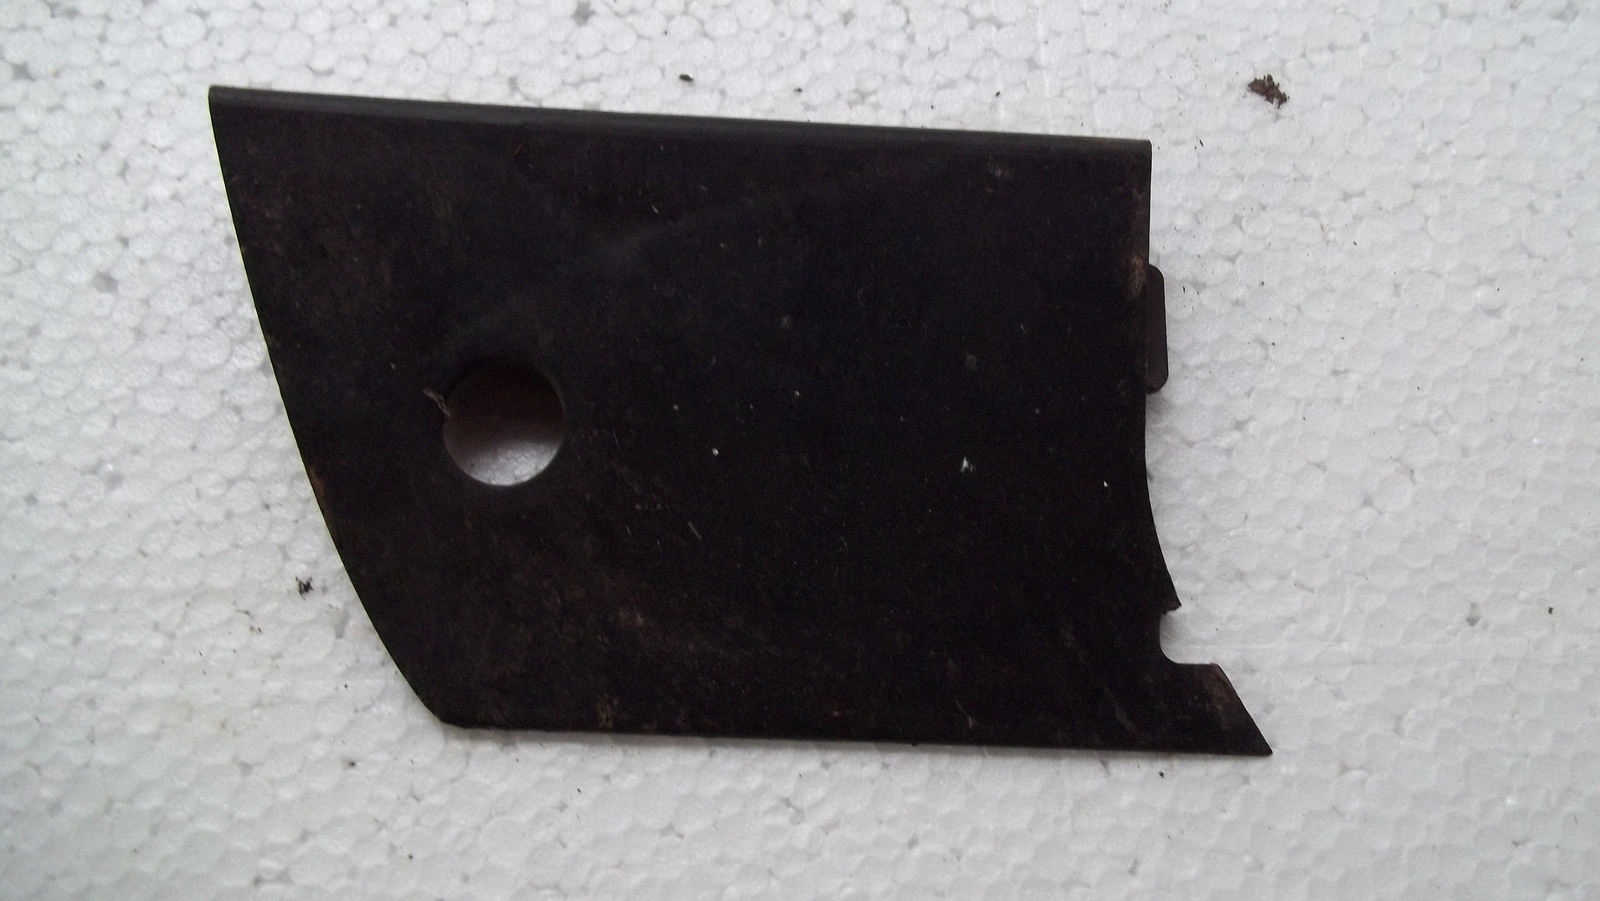 Primary image for Baffle 532161333 from Craftsman Lawnmower Model 917.377810